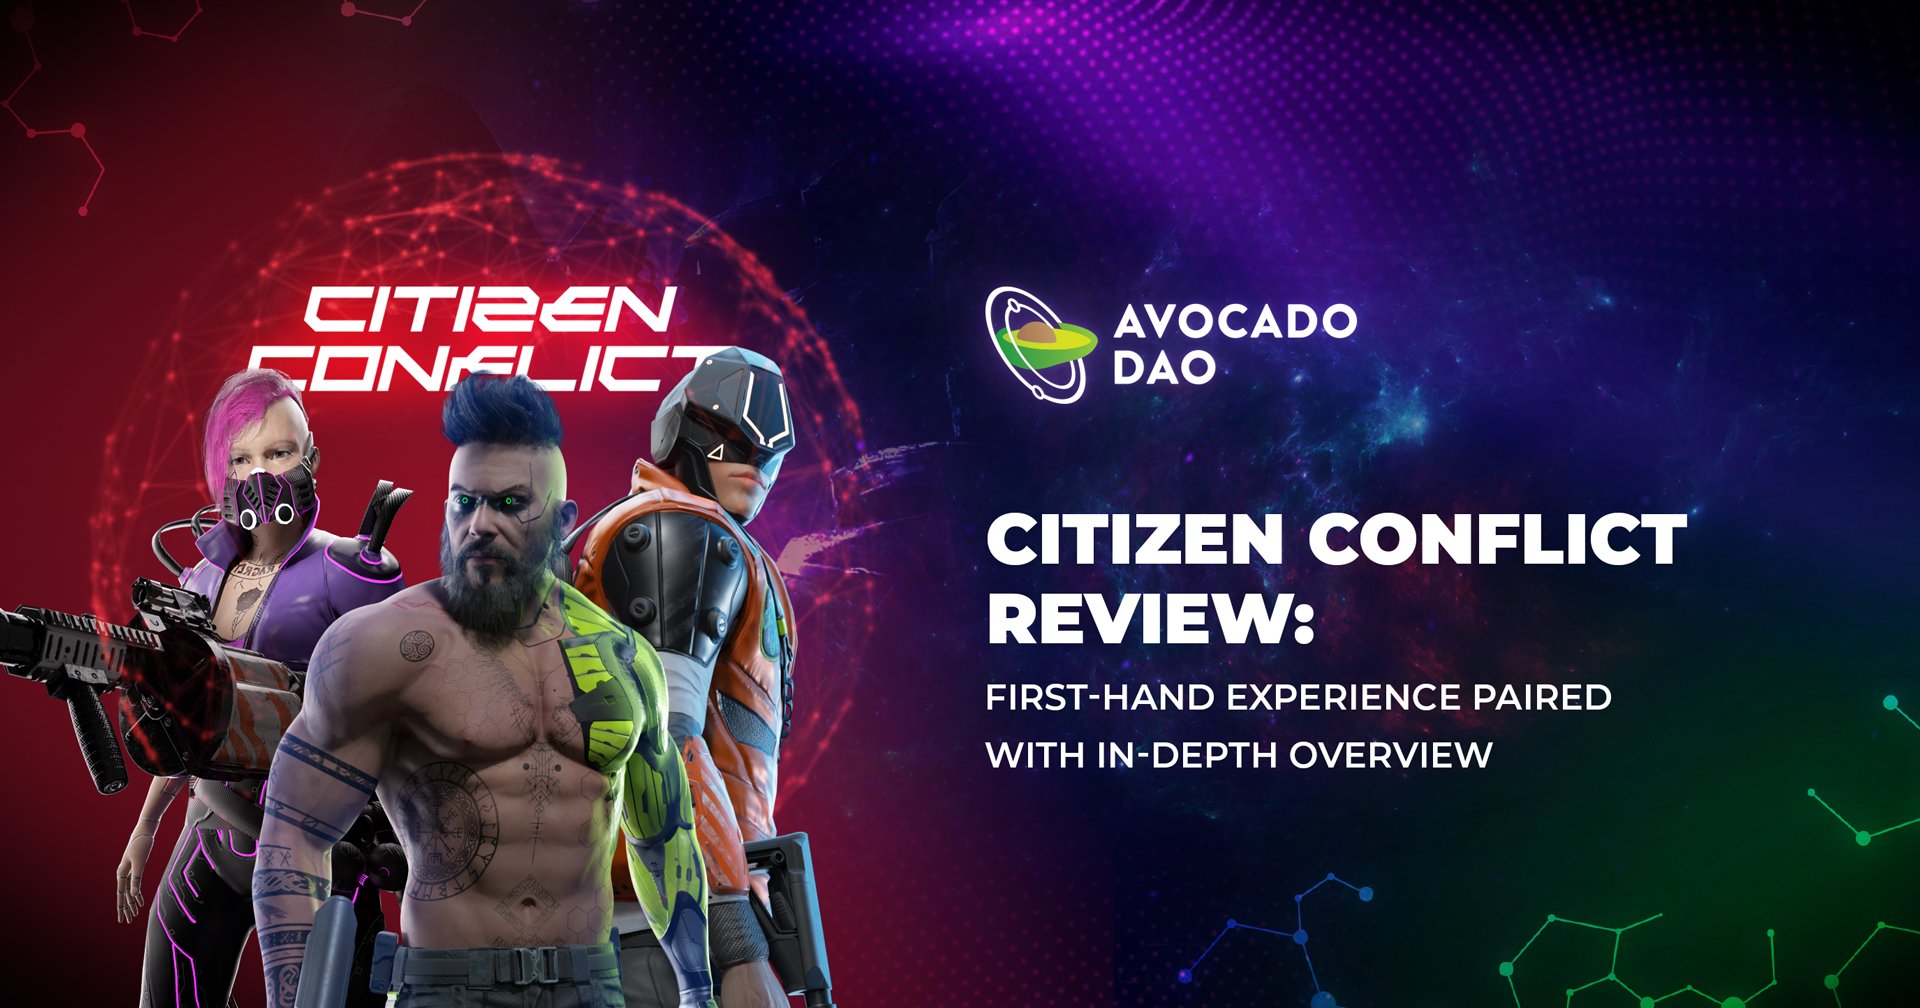 Citizen Conflict Review: First-hand Experience Paired With In-depth Overview